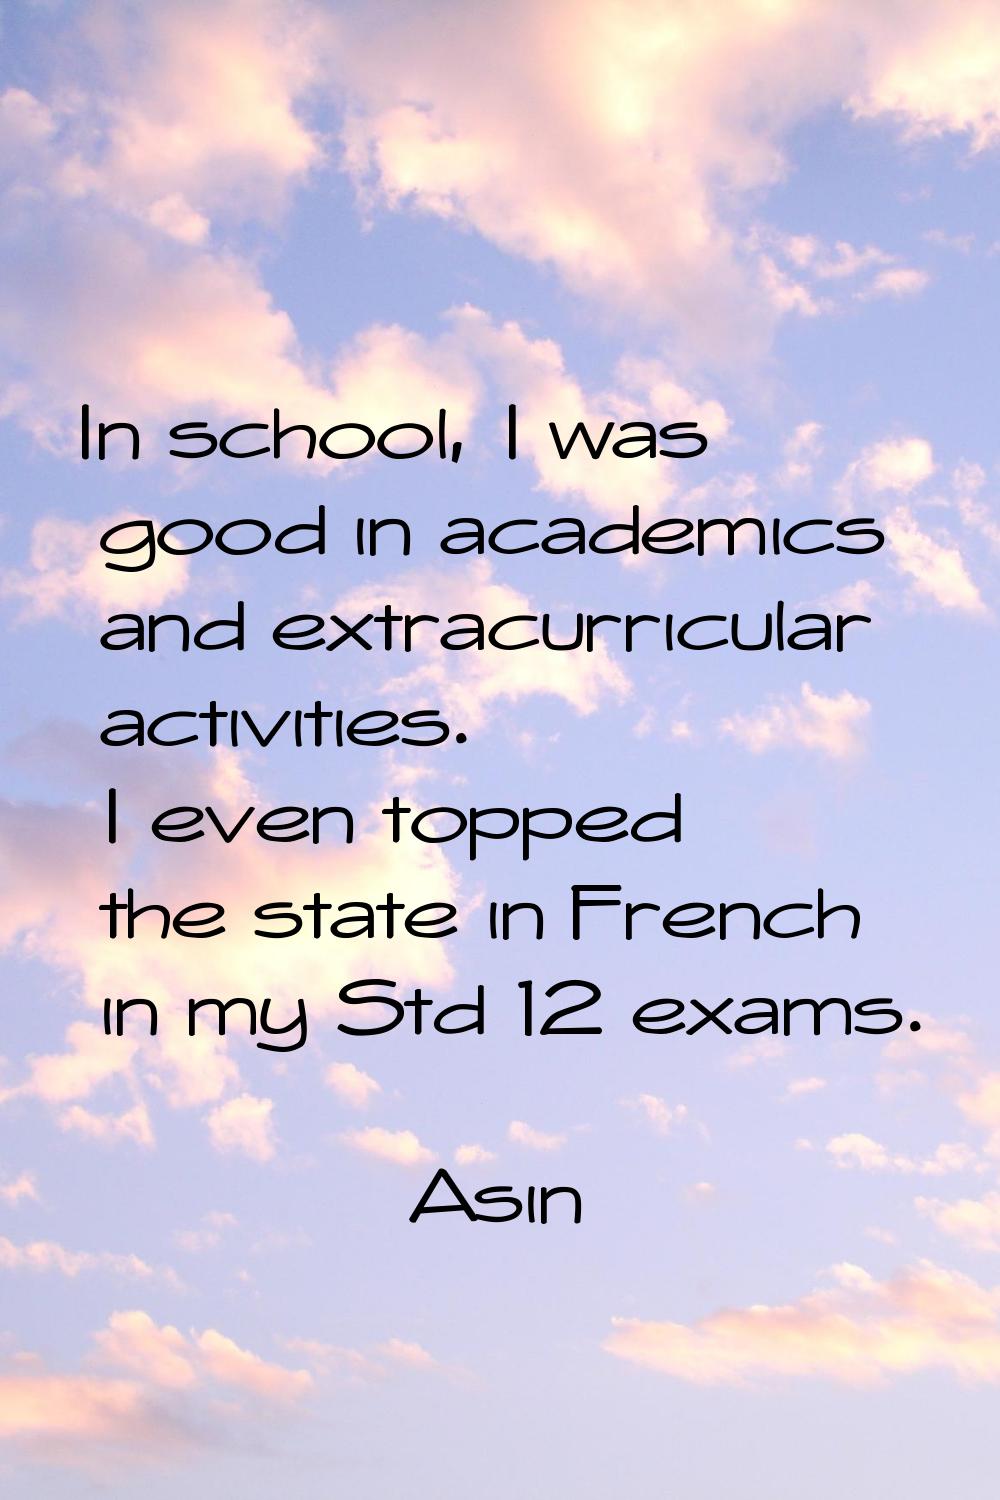 In school, I was good in academics and extracurricular activities. I even topped the state in Frenc